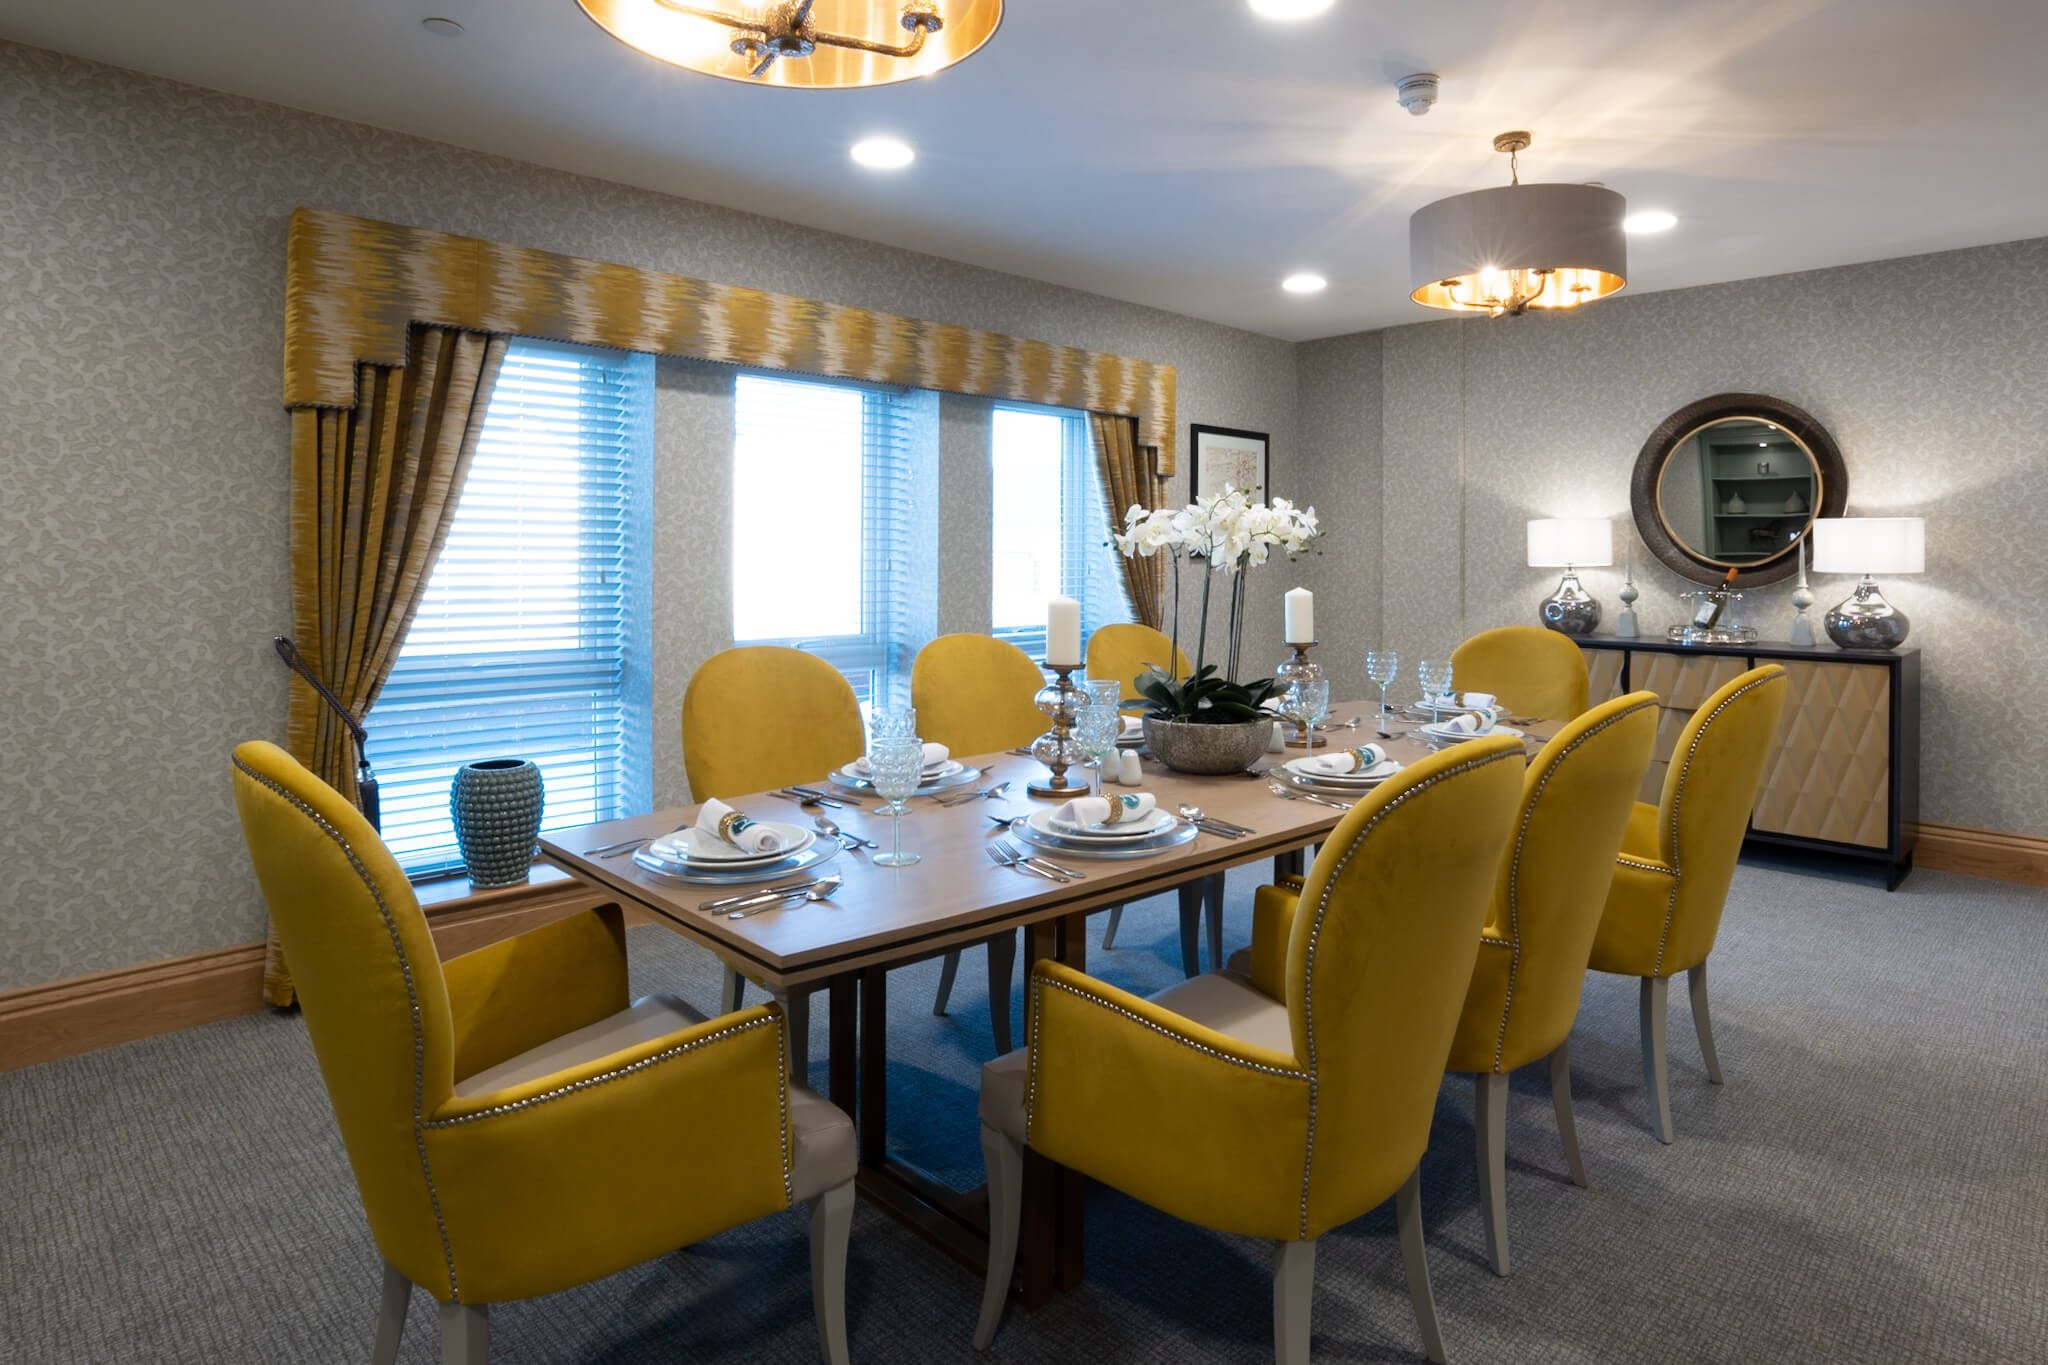 Dressed table for eight people. Yellow dining room chairs with matching curtains. Console table with circle mirror above.